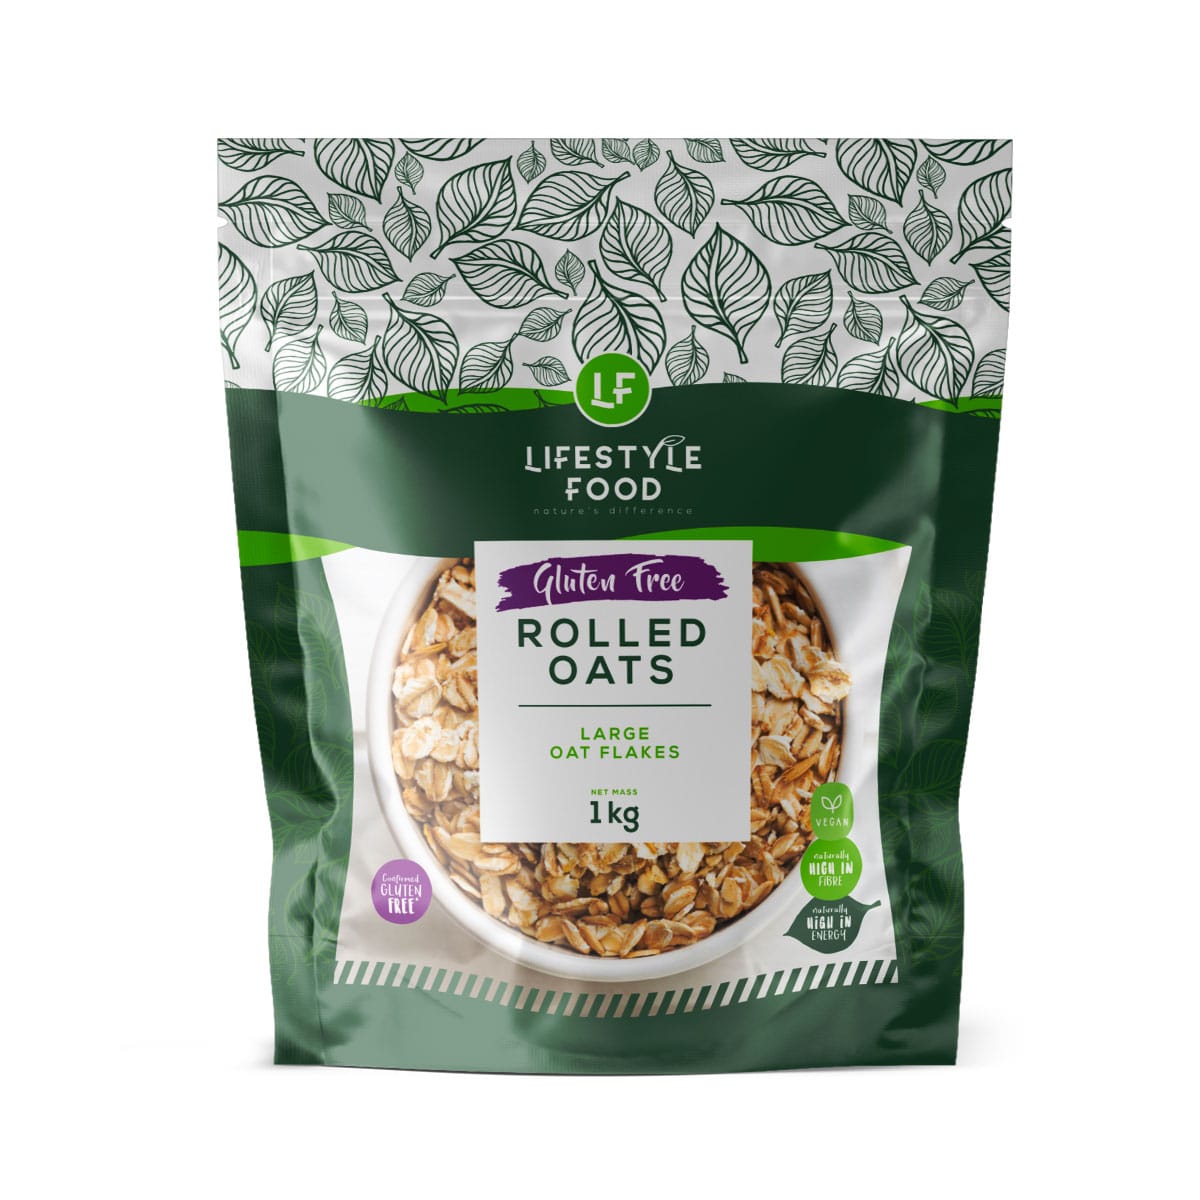 Lifestyle Food Gluten Free Rolled Oats Value Pack - 1kg